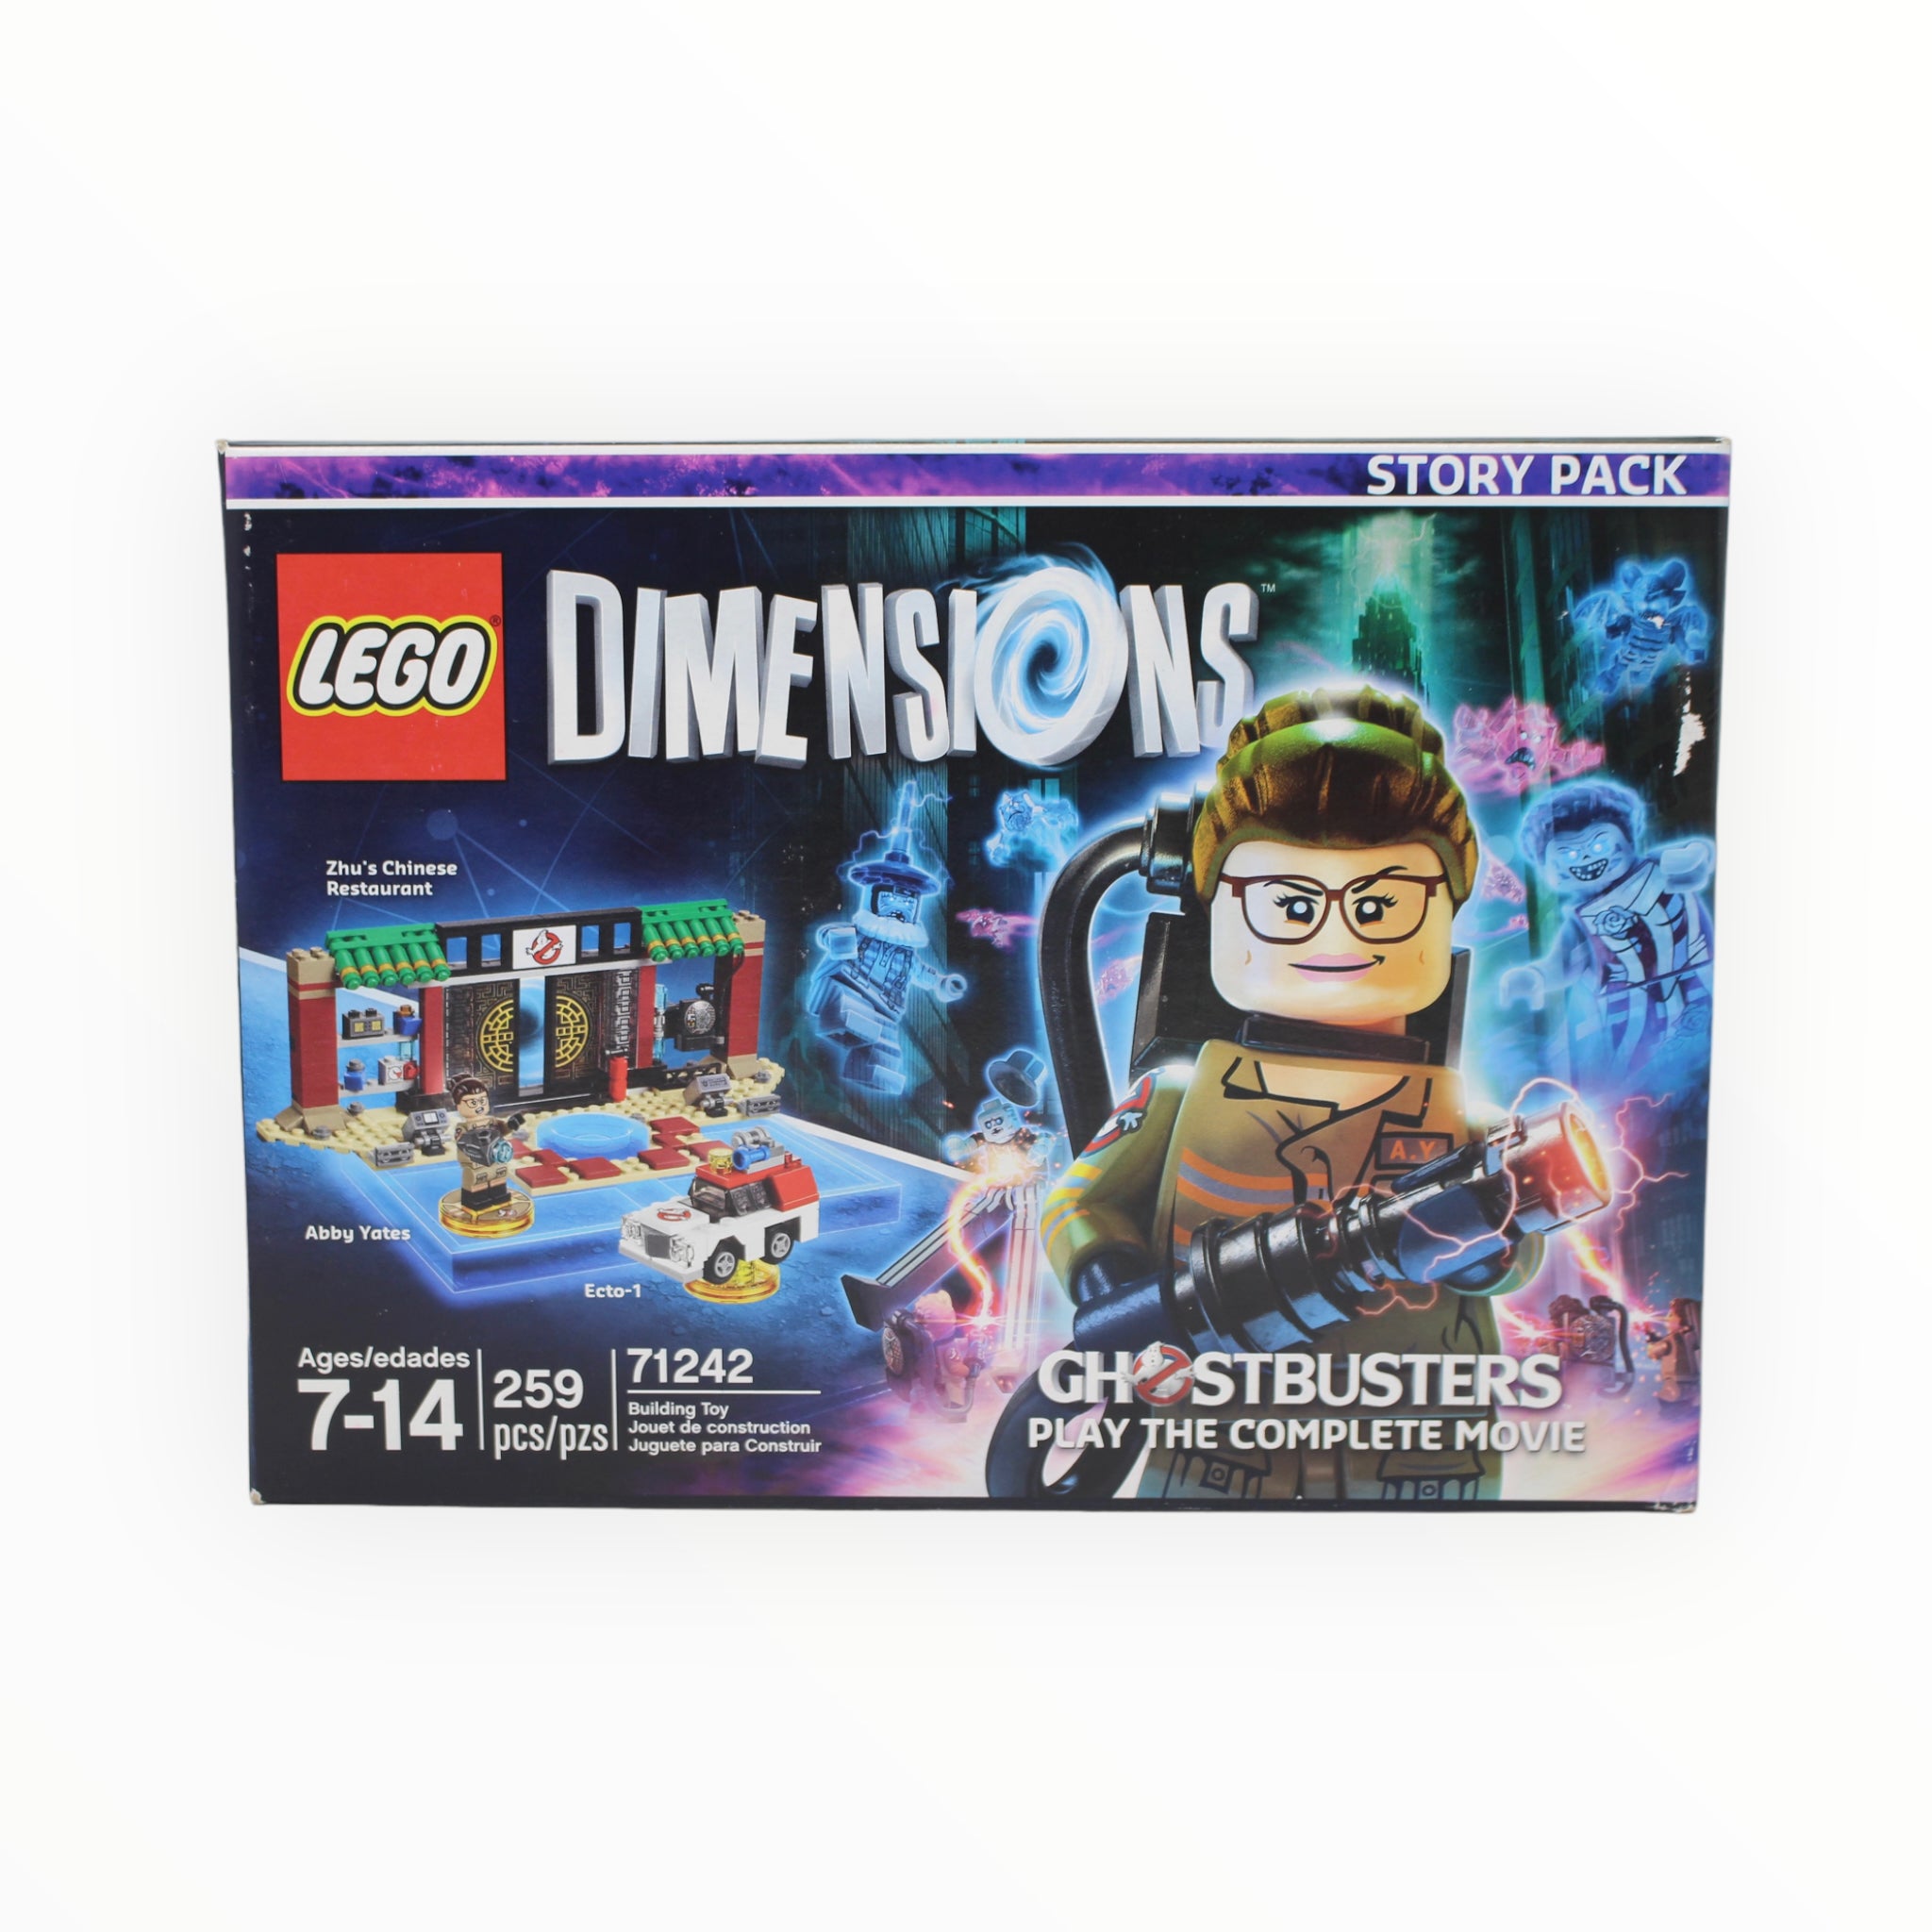 Retired Set 71242 Dimensions Story Pack - Ghostbusters: Play the Complete Movie